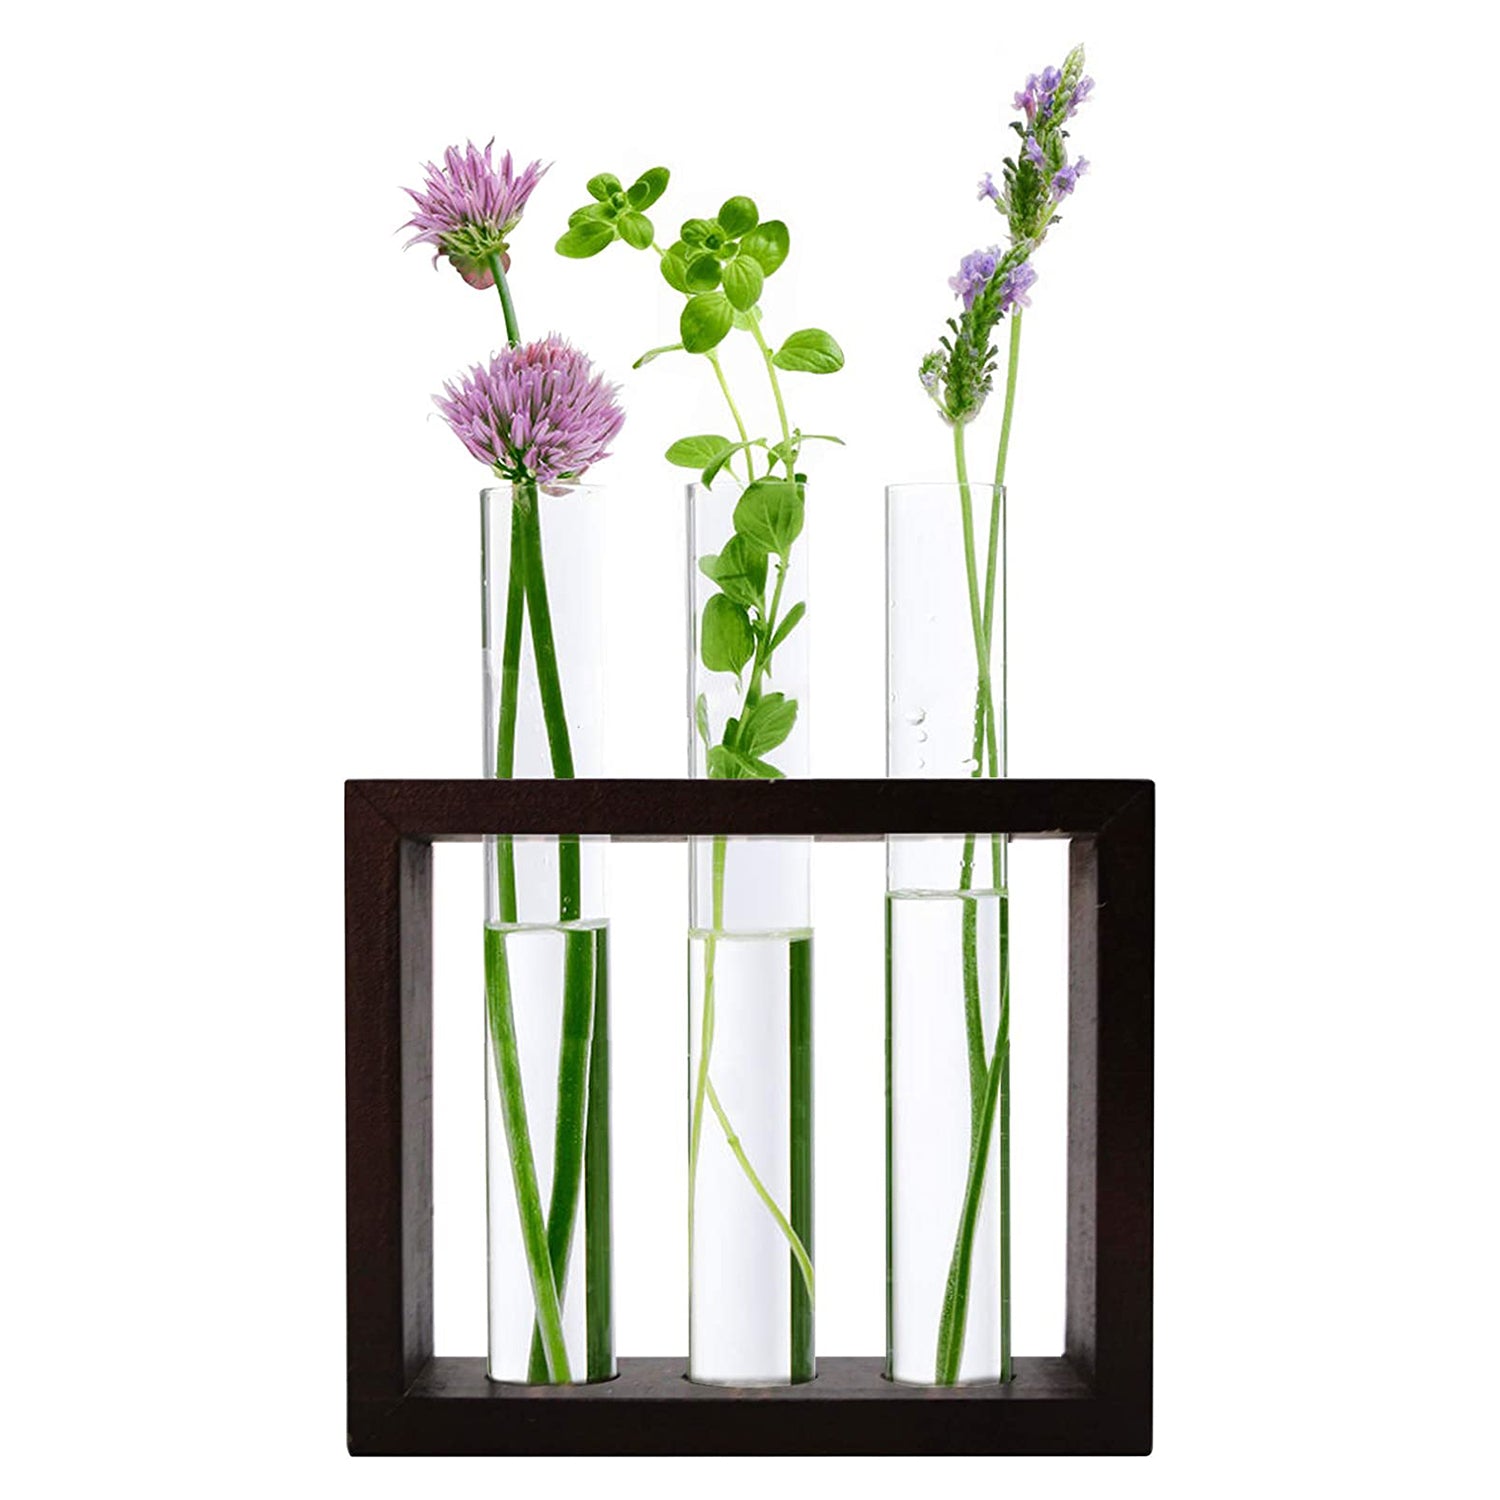 Banord Desktop Glass Terrarium, Wall Hanging Glass Planter with 3 Modern Test Tubes in Wood Stand, Tabletop Tube Container for Home Office Decoration, Dark Brown